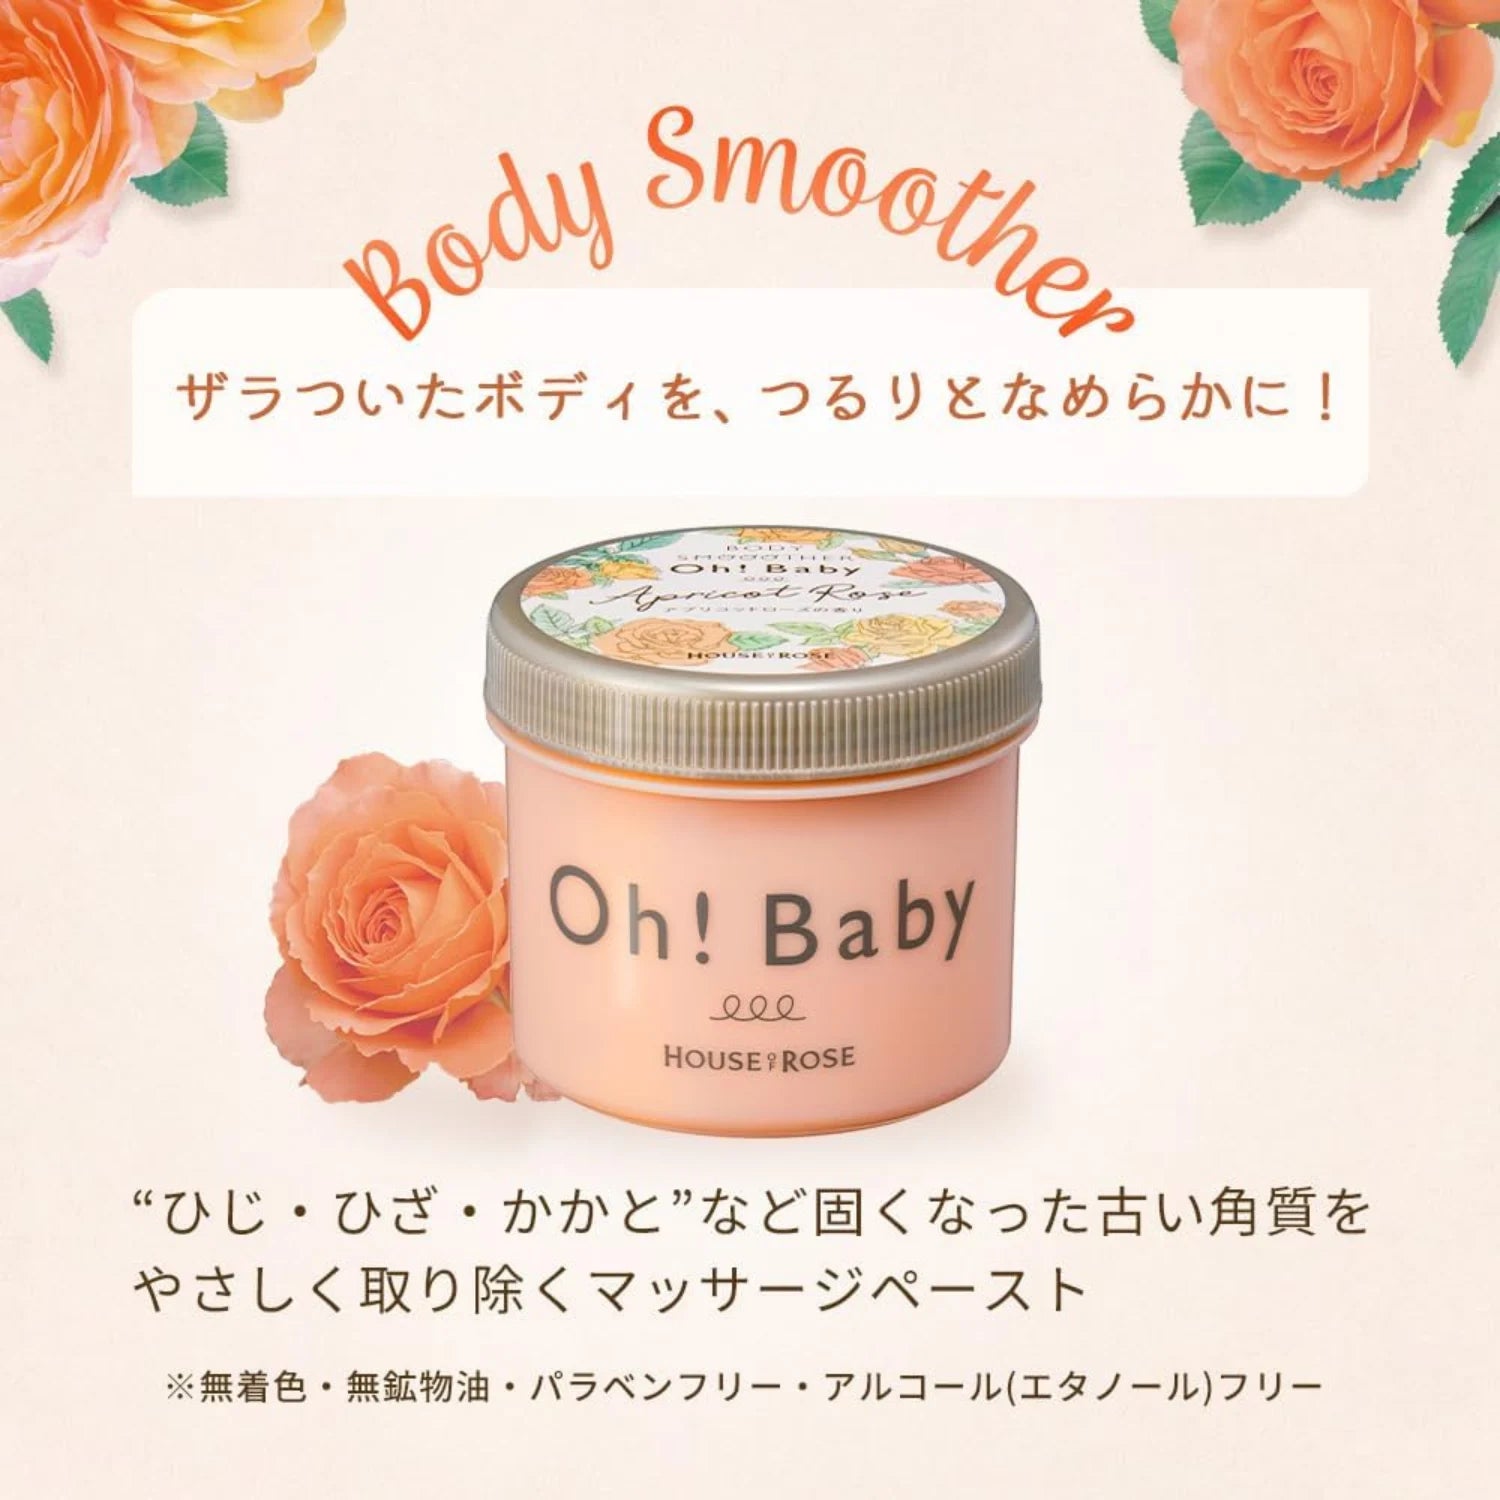 House Of Rose Oh! Baby Body Scrub Smoother Cream Apricot Rose 350g - Buy Me Japan